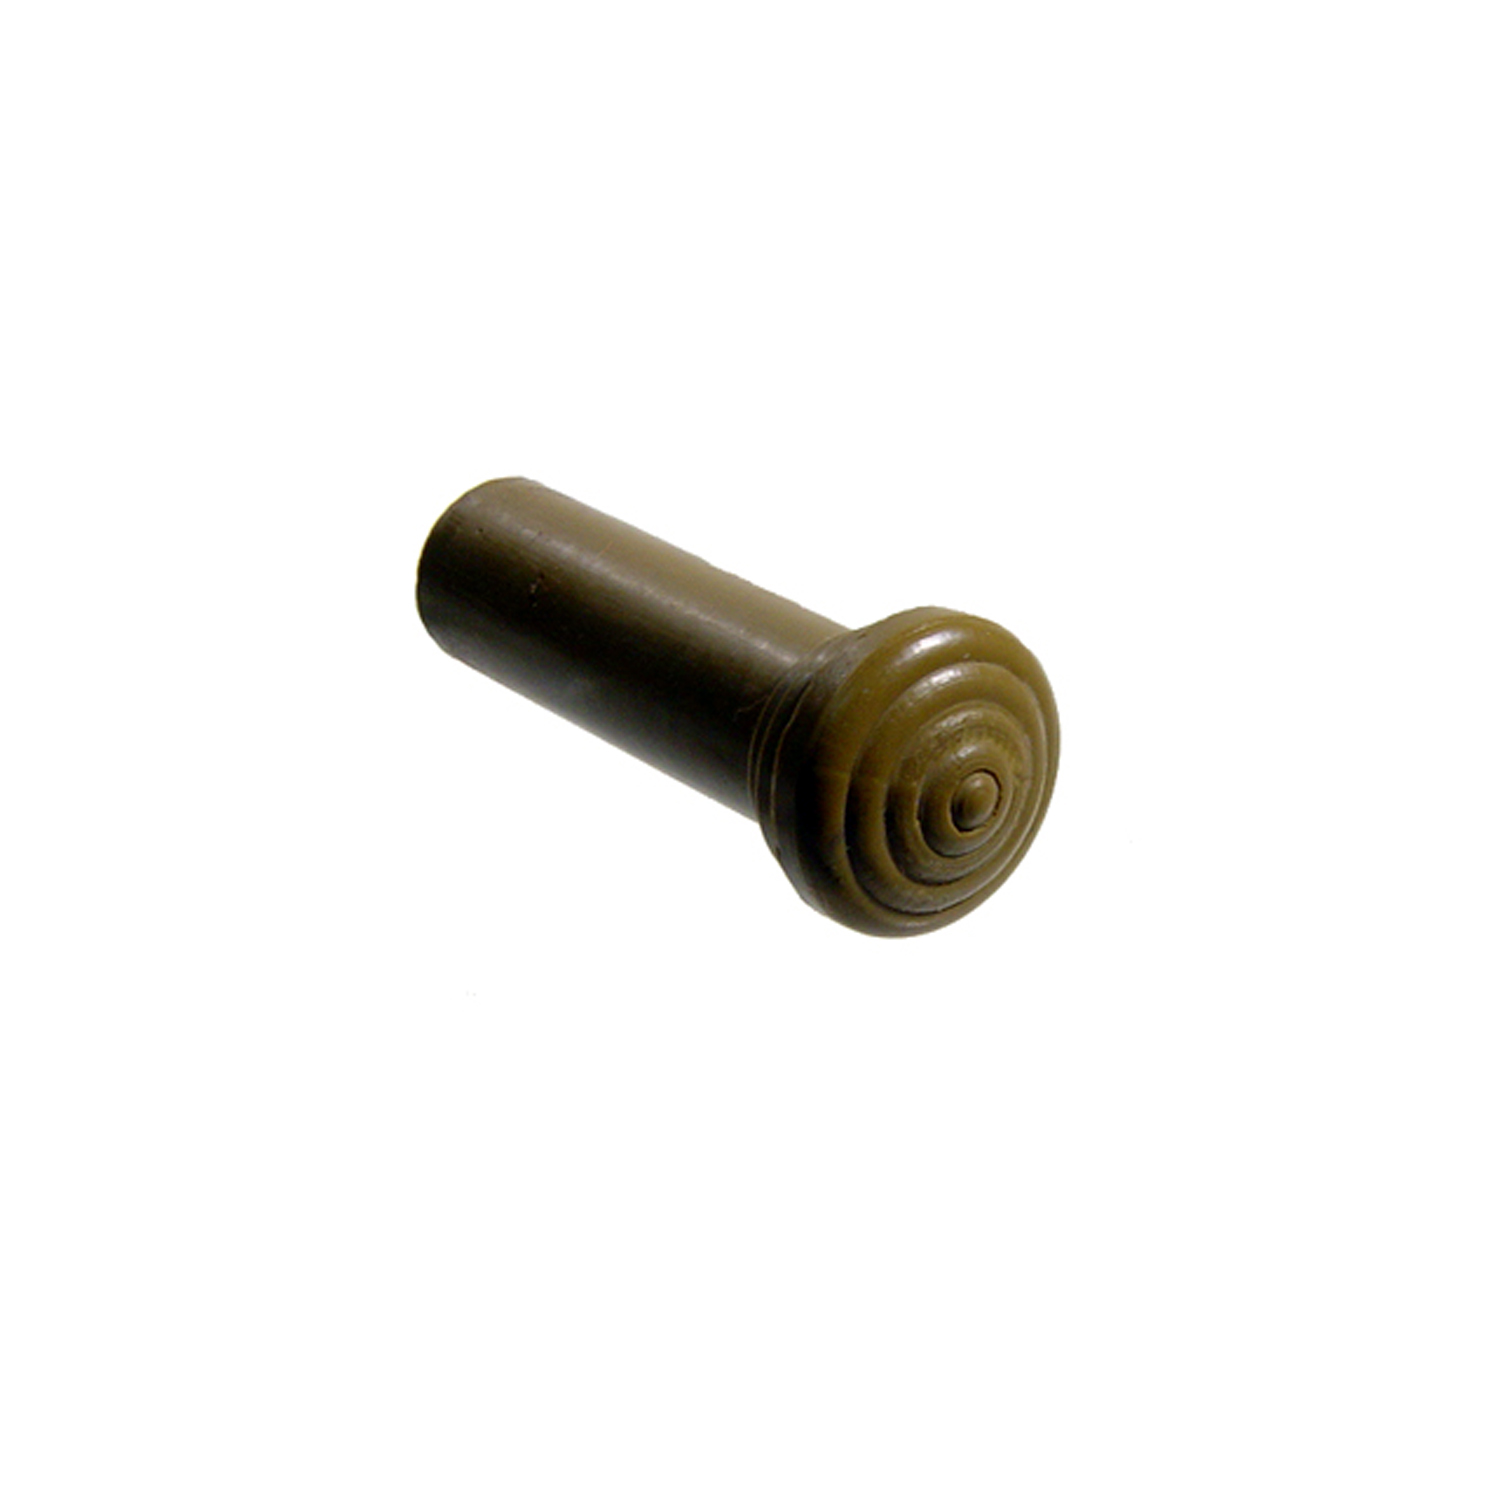 1957 Chevrolet Bel Air Door Lock Knob.  Made of Olive Green rubber, self-threading-RP 304-G